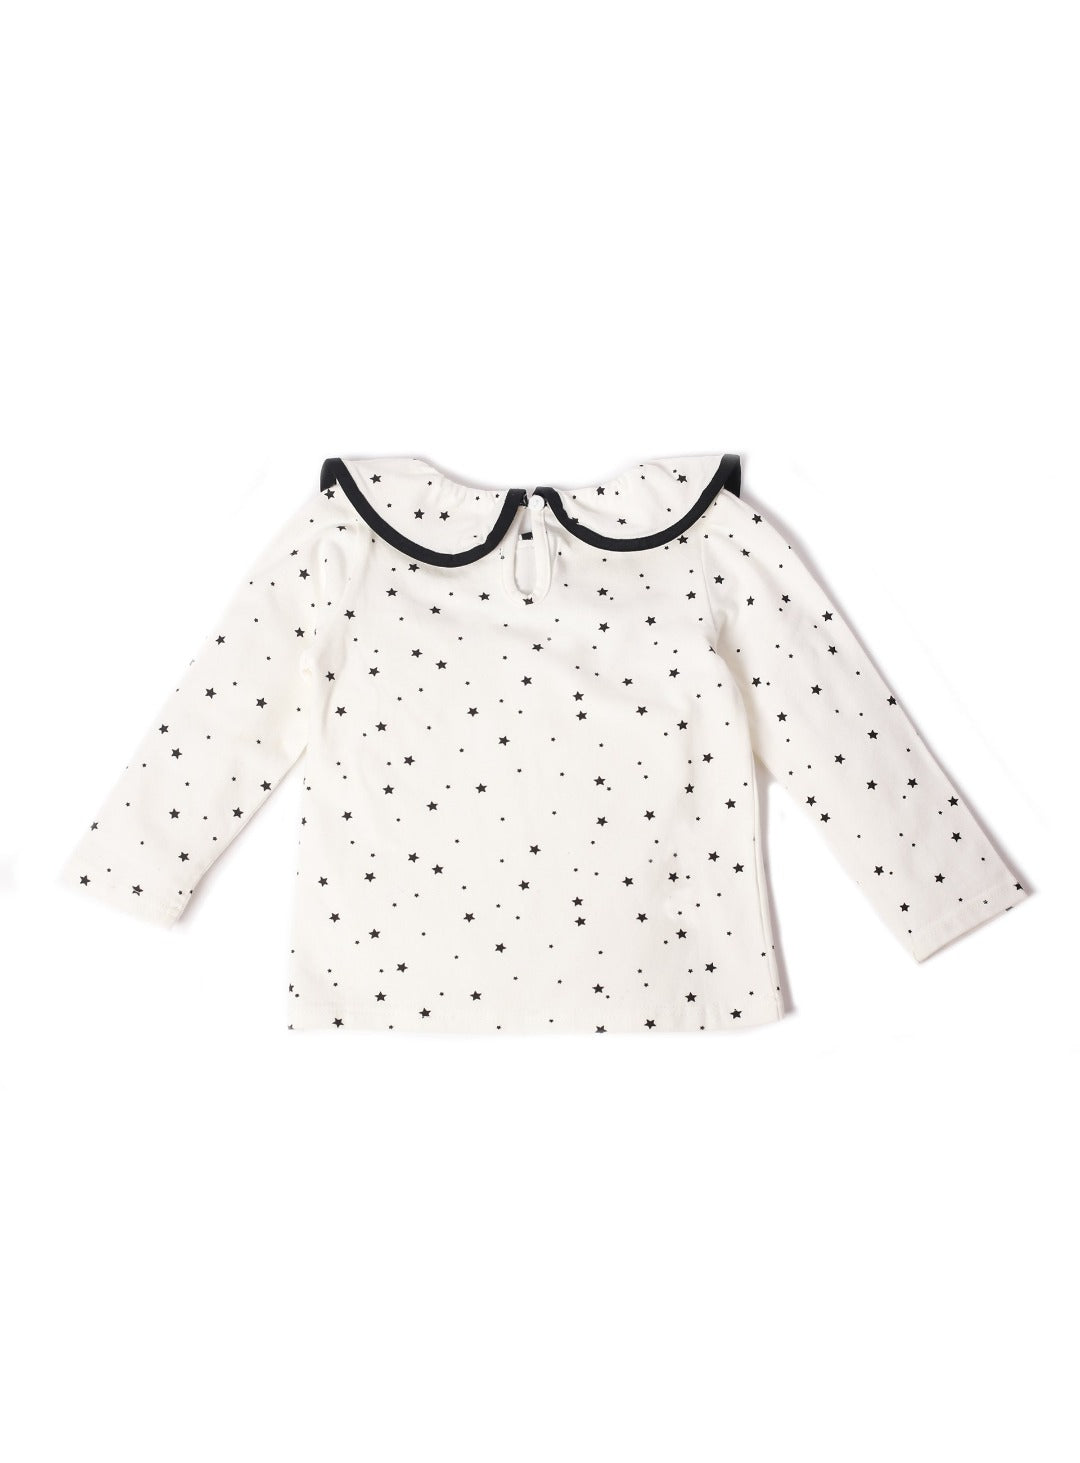 starry white top with scallop collar